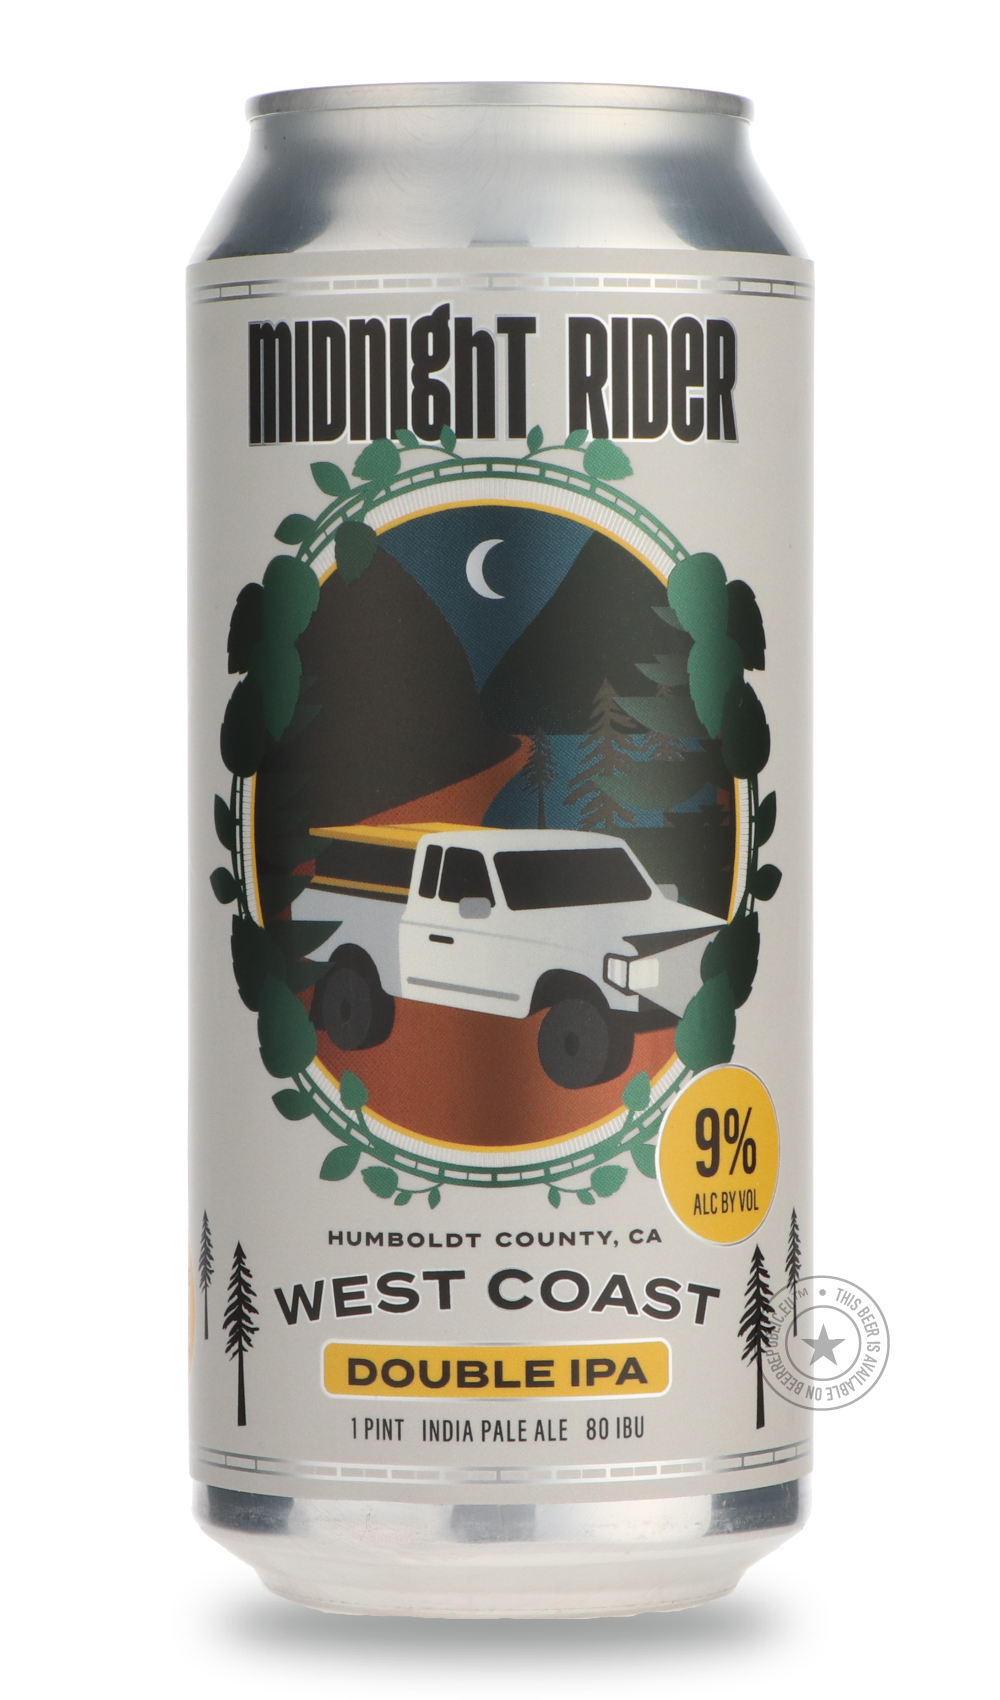 -Eel River- Midnight Rider-IPA- Only @ Beer Republic - The best online beer store for American & Canadian craft beer - Buy beer online from the USA and Canada - Bier online kopen - Amerikaans bier kopen - Craft beer store - Craft beer kopen - Amerikanisch bier kaufen - Bier online kaufen - Acheter biere online - IPA - Stout - Porter - New England IPA - Hazy IPA - Imperial Stout - Barrel Aged - Barrel Aged Imperial Stout - Brown - Dark beer - Blond - Blonde - Pilsner - Lager - Wheat - Weizen - Amber - Barley